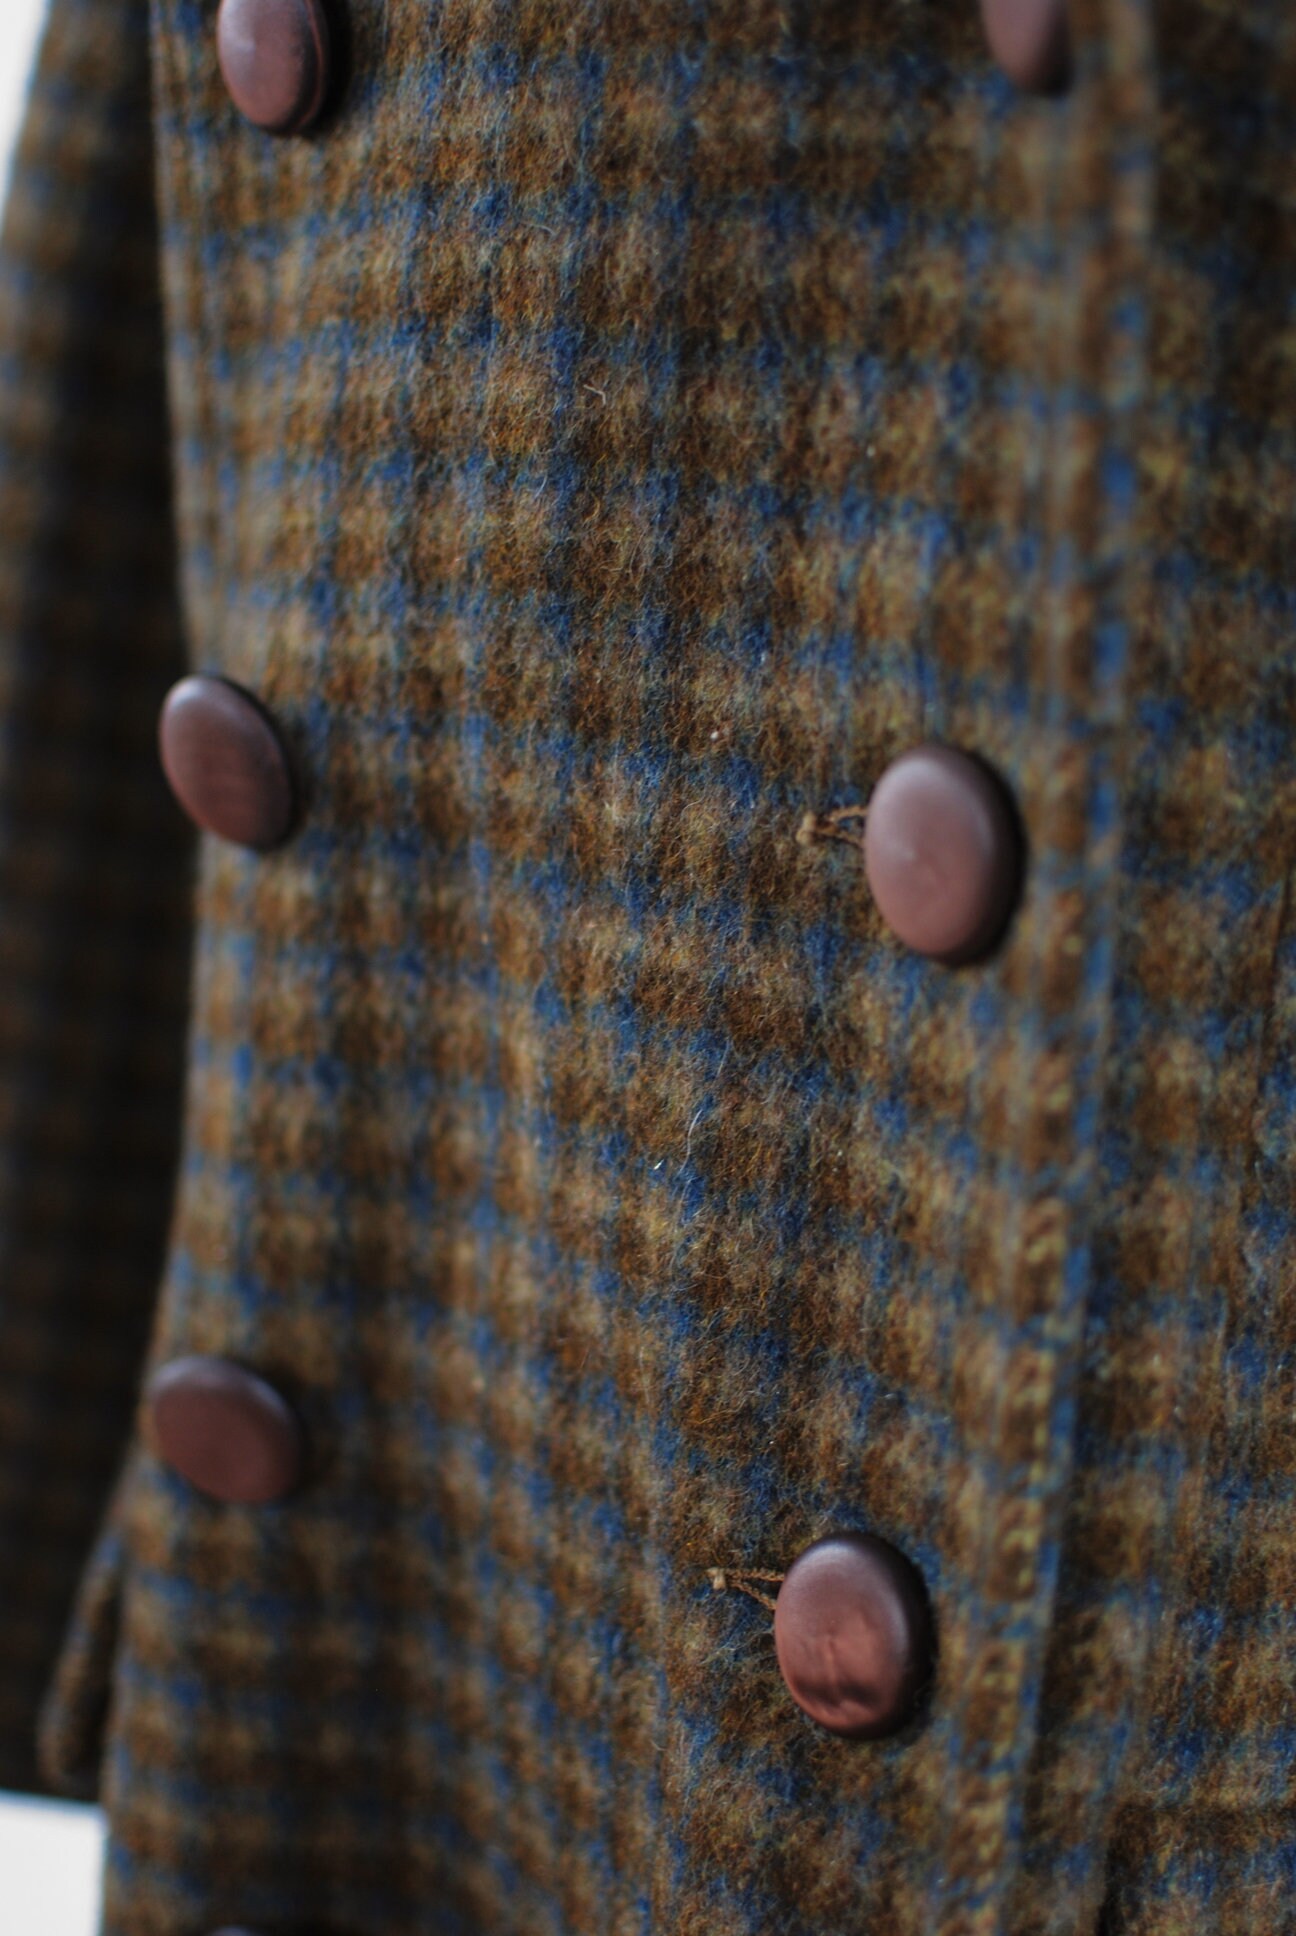 1970's Olive Check Wool Double-breasted Short Coat | Etsy